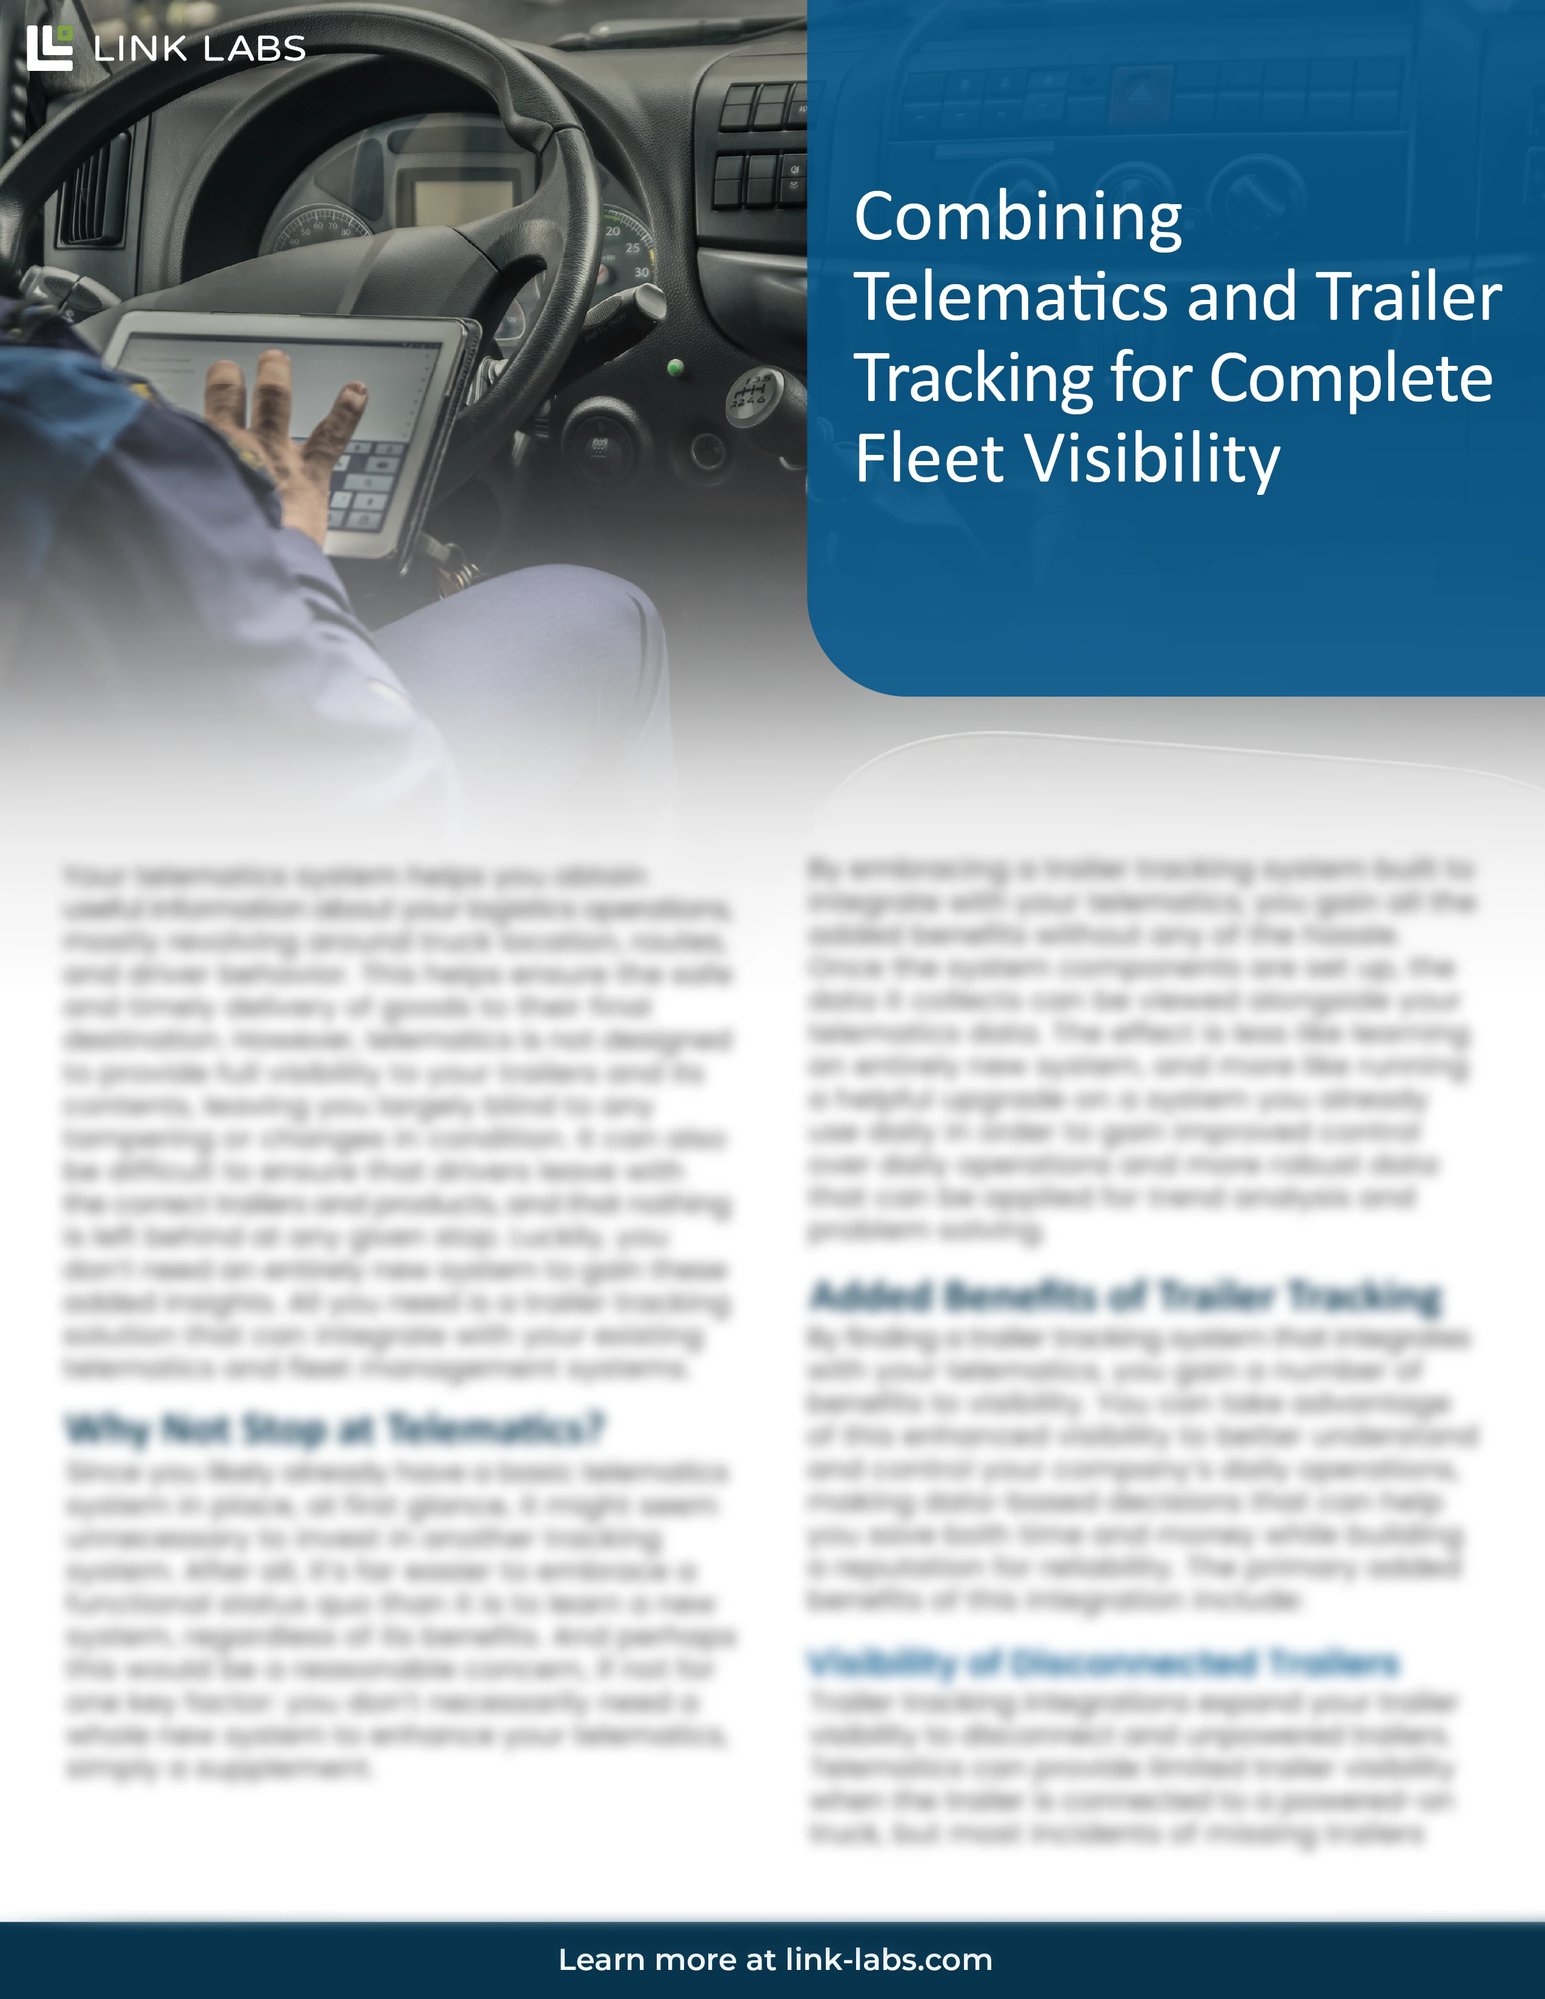 Combining Telematics and Trailer Tracking for Complete Fleet Visibility